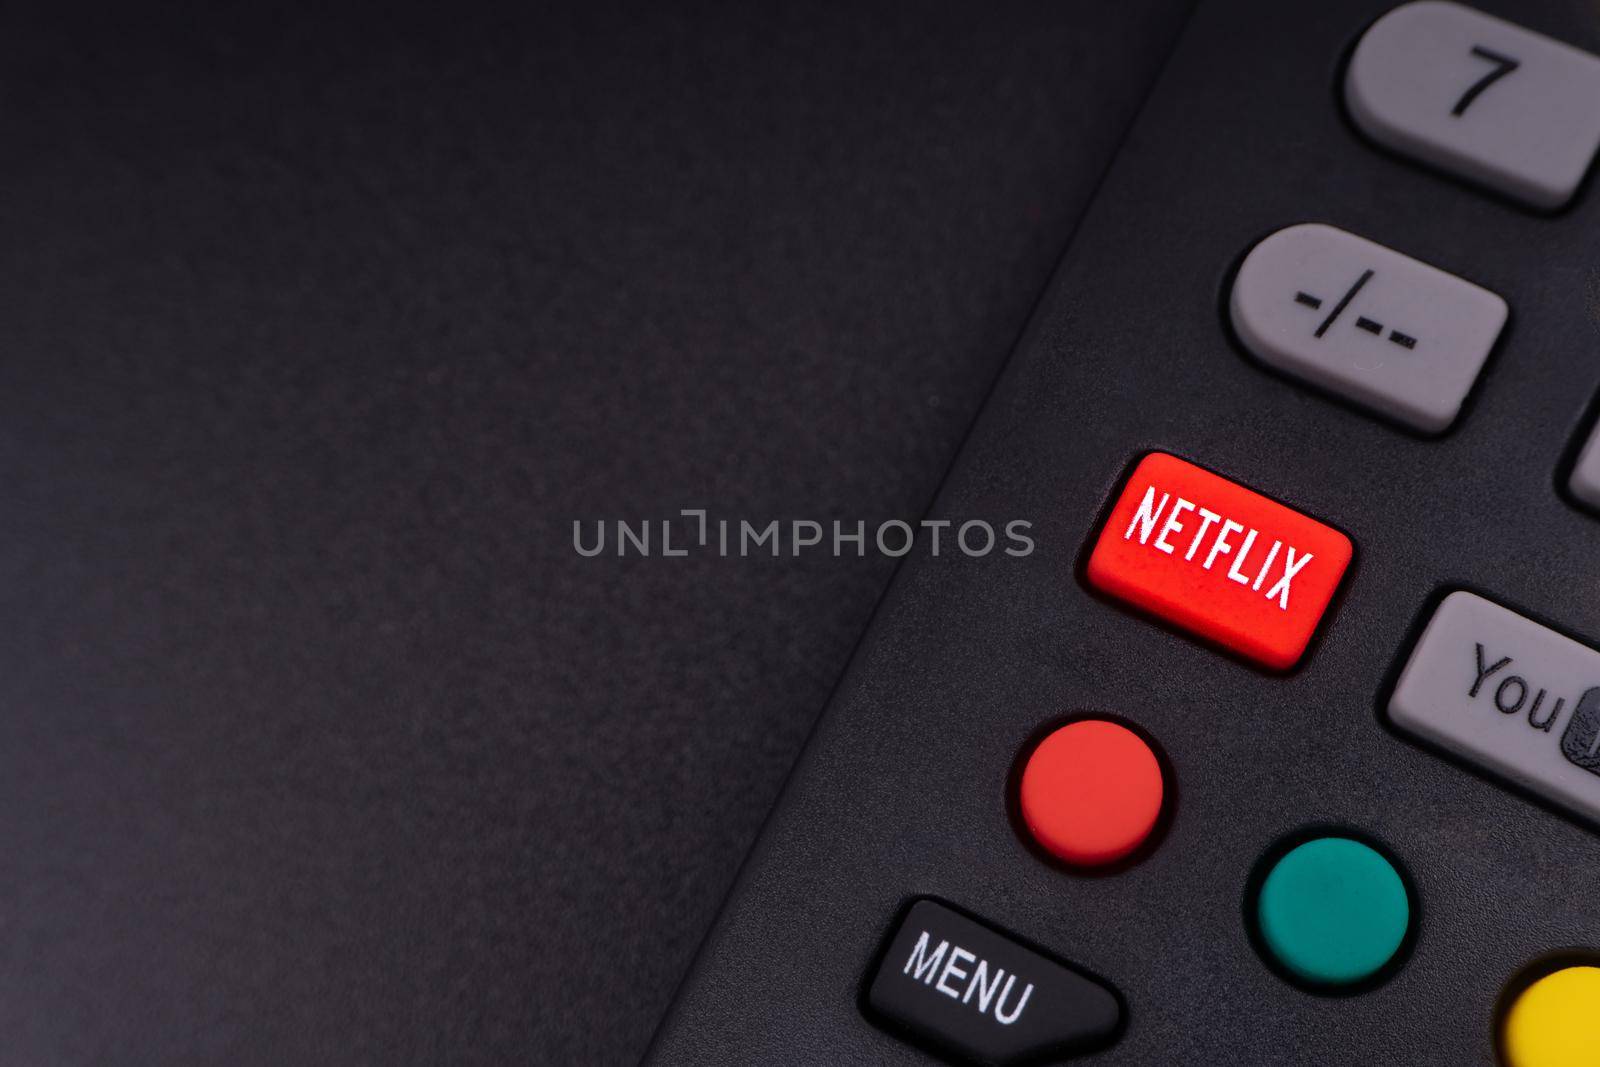 NETFLIX television remote controller on black background by silverwings